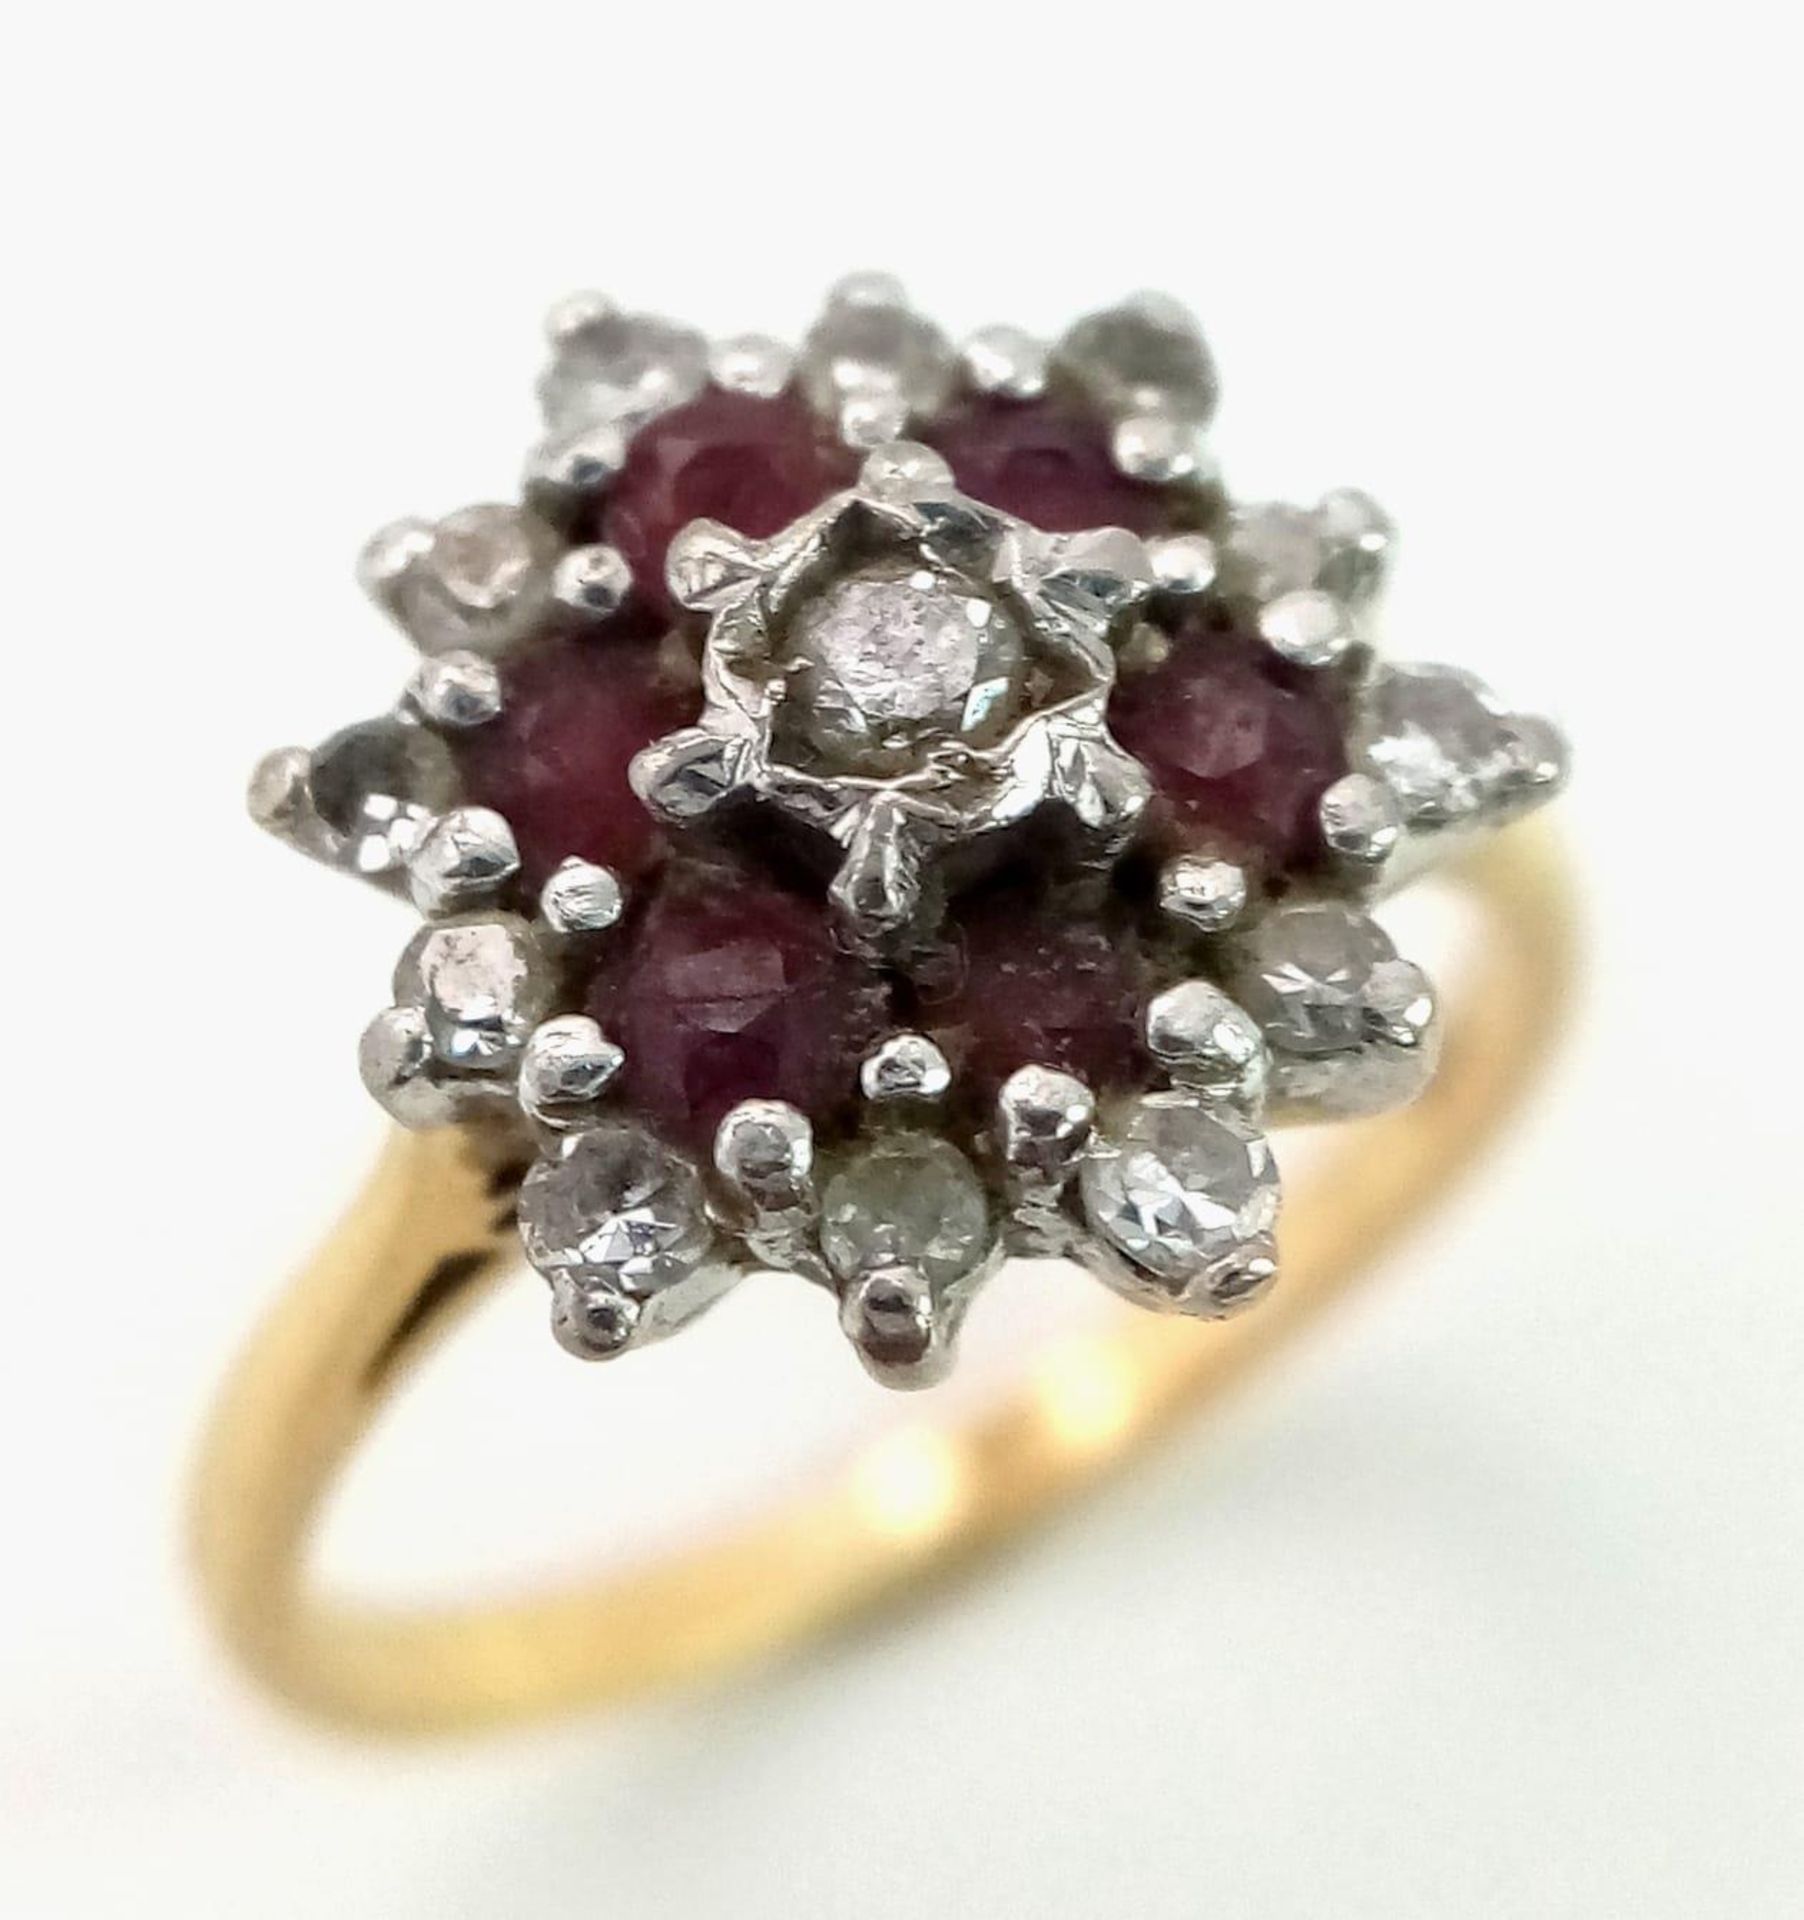 18K YELLOW GOLD DIAMOND & RUBY CLUSTER RING. TOTAL WEIGHT 3.4G. SIZE K - Image 2 of 4